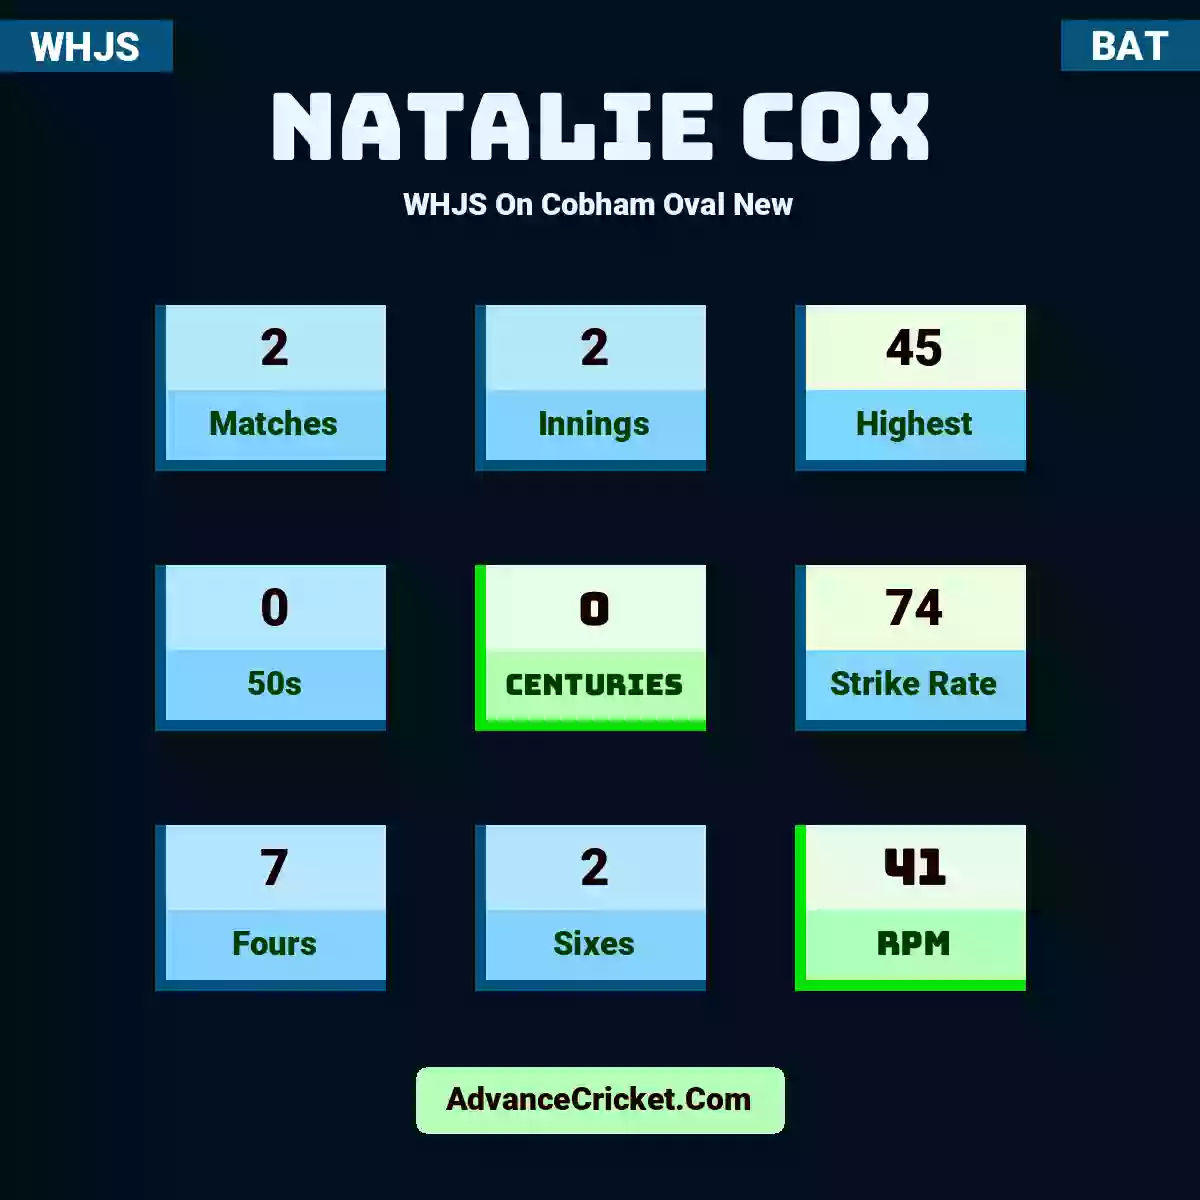 Natalie Cox WHJS  On Cobham Oval New, Natalie Cox played 2 matches, scored 45 runs as highest, 0 half-centuries, and 0 centuries, with a strike rate of 74. N.Cox hit 7 fours and 2 sixes, with an RPM of 41.